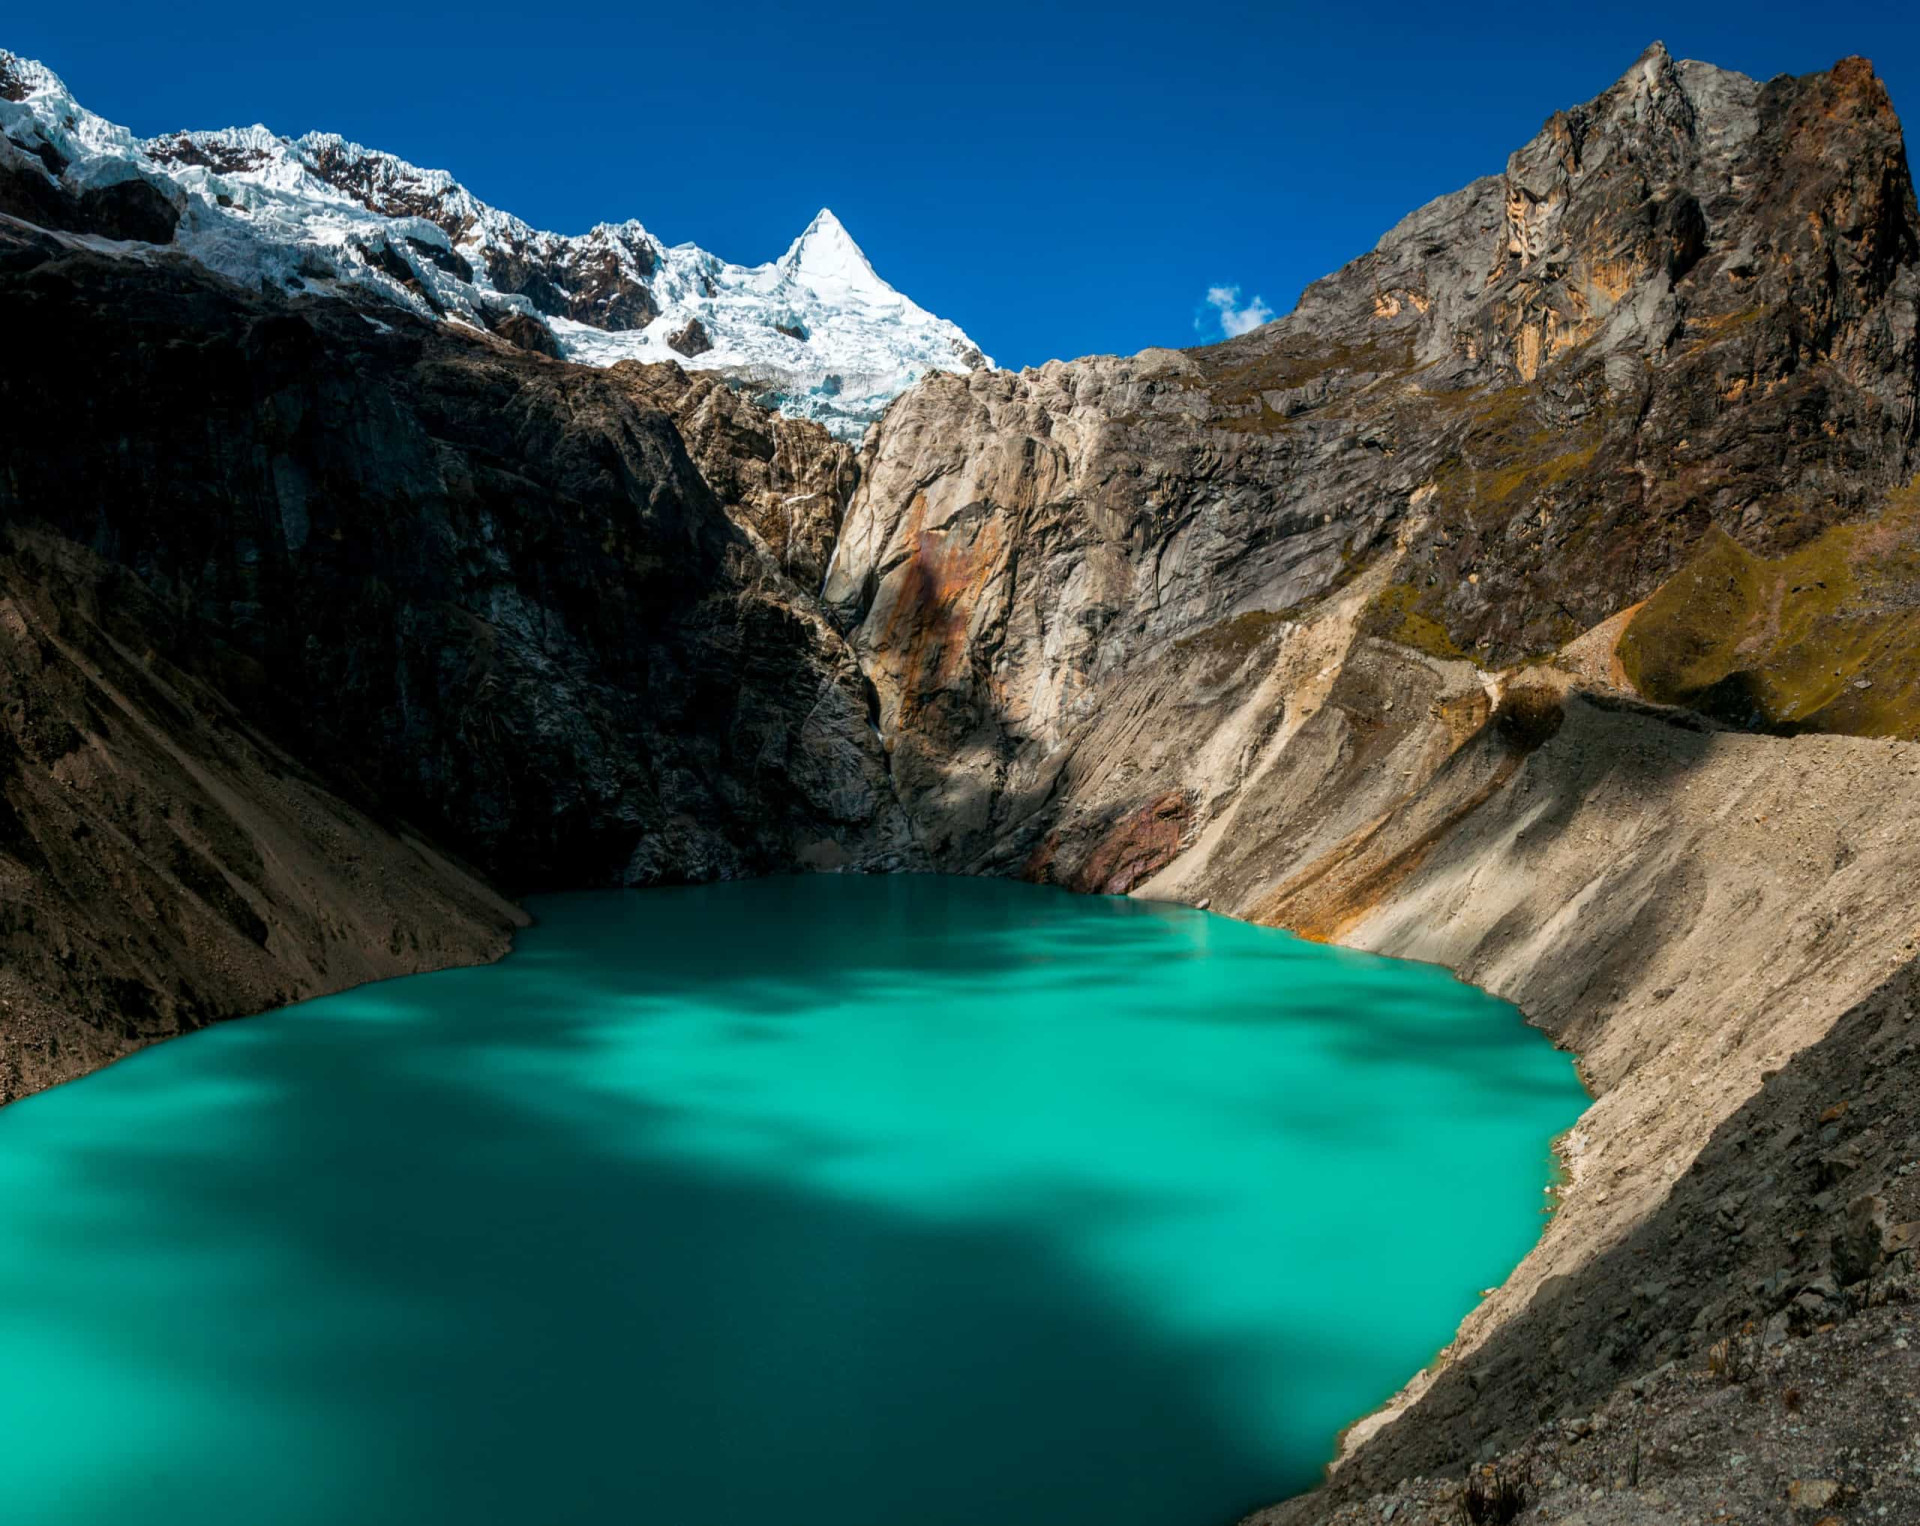 Location: Ancash<br>Criteria: Natural<br>Year established: 1985<br>Description: Named after the tallest mountain in Peru (and Huascar, a 16th-century Inca emperor), the park harbors a unique biodiversity. It’s noted also for its 300 or so glacial lakes.<p><a href="https://www.msn.com/en-us/community/channel/vid-7xx8mnucu55yw63we9va2gwr7uihbxwc68fxqp25x6tg4ftibpra?cvid=94631541bc0f4f89bfd59158d696ad7e">Follow us and access great exclusive content every day</a></p>